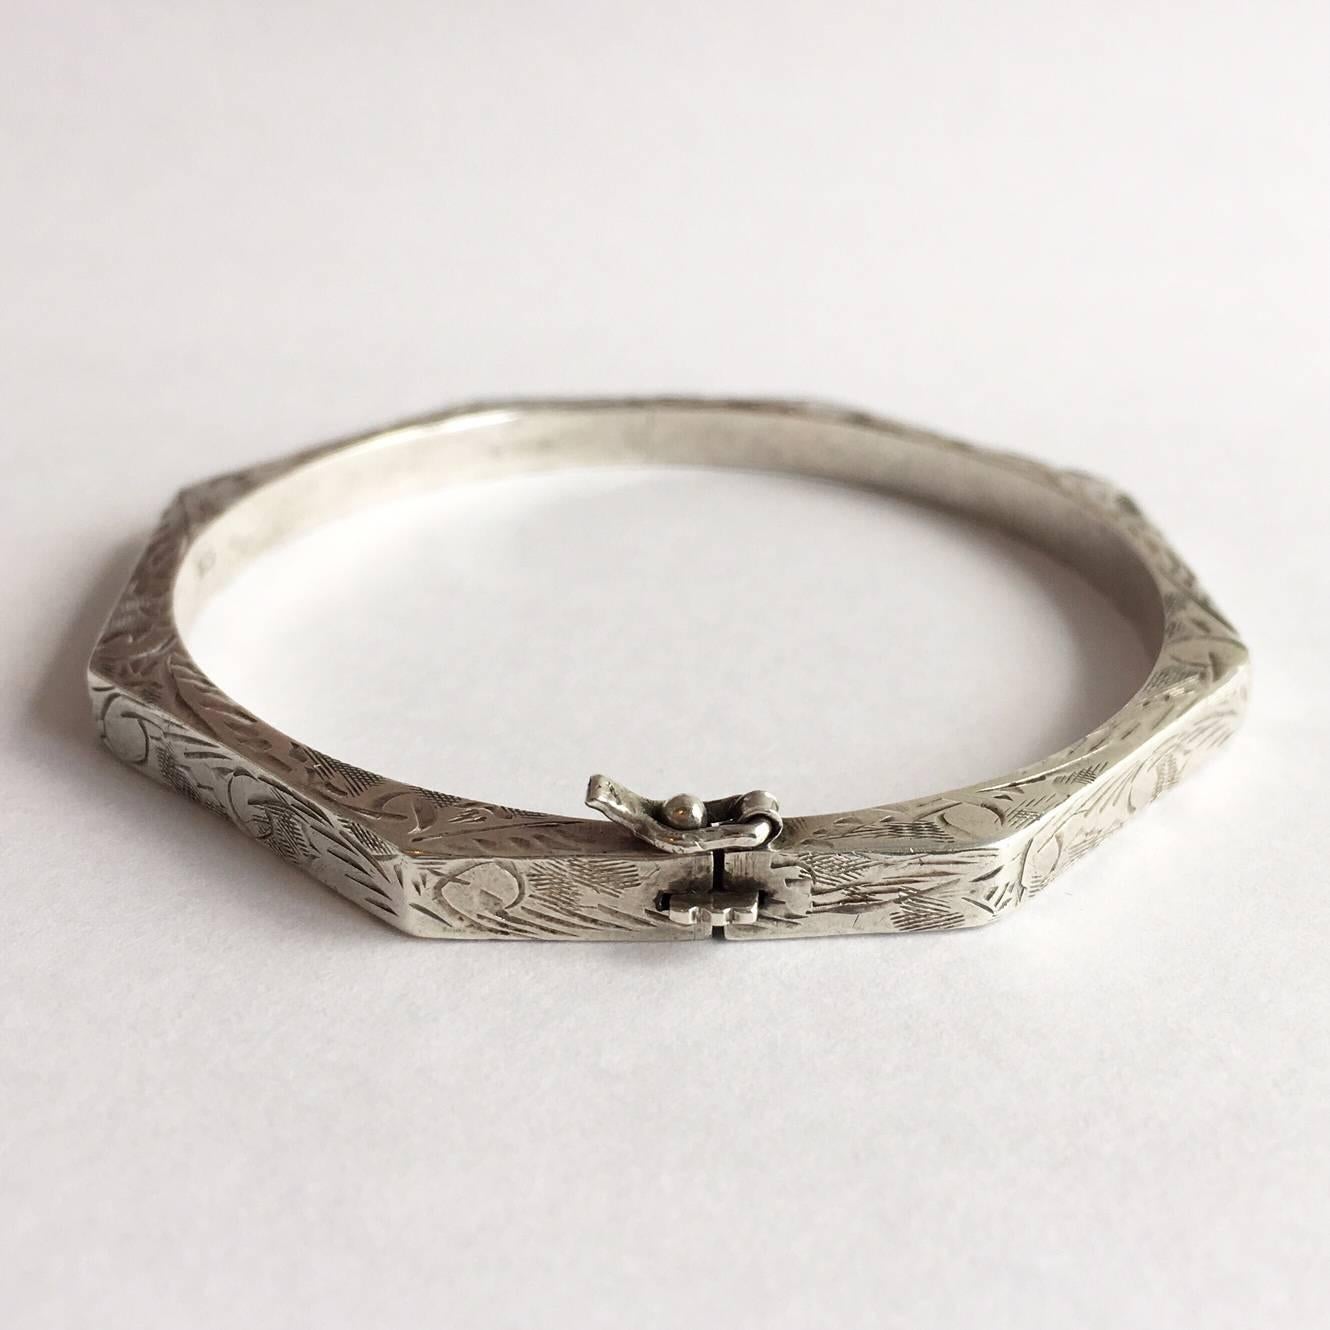 Women's Vintage Octagonal Etched Hollow Imported Silver Hinged Bangle Bracelet